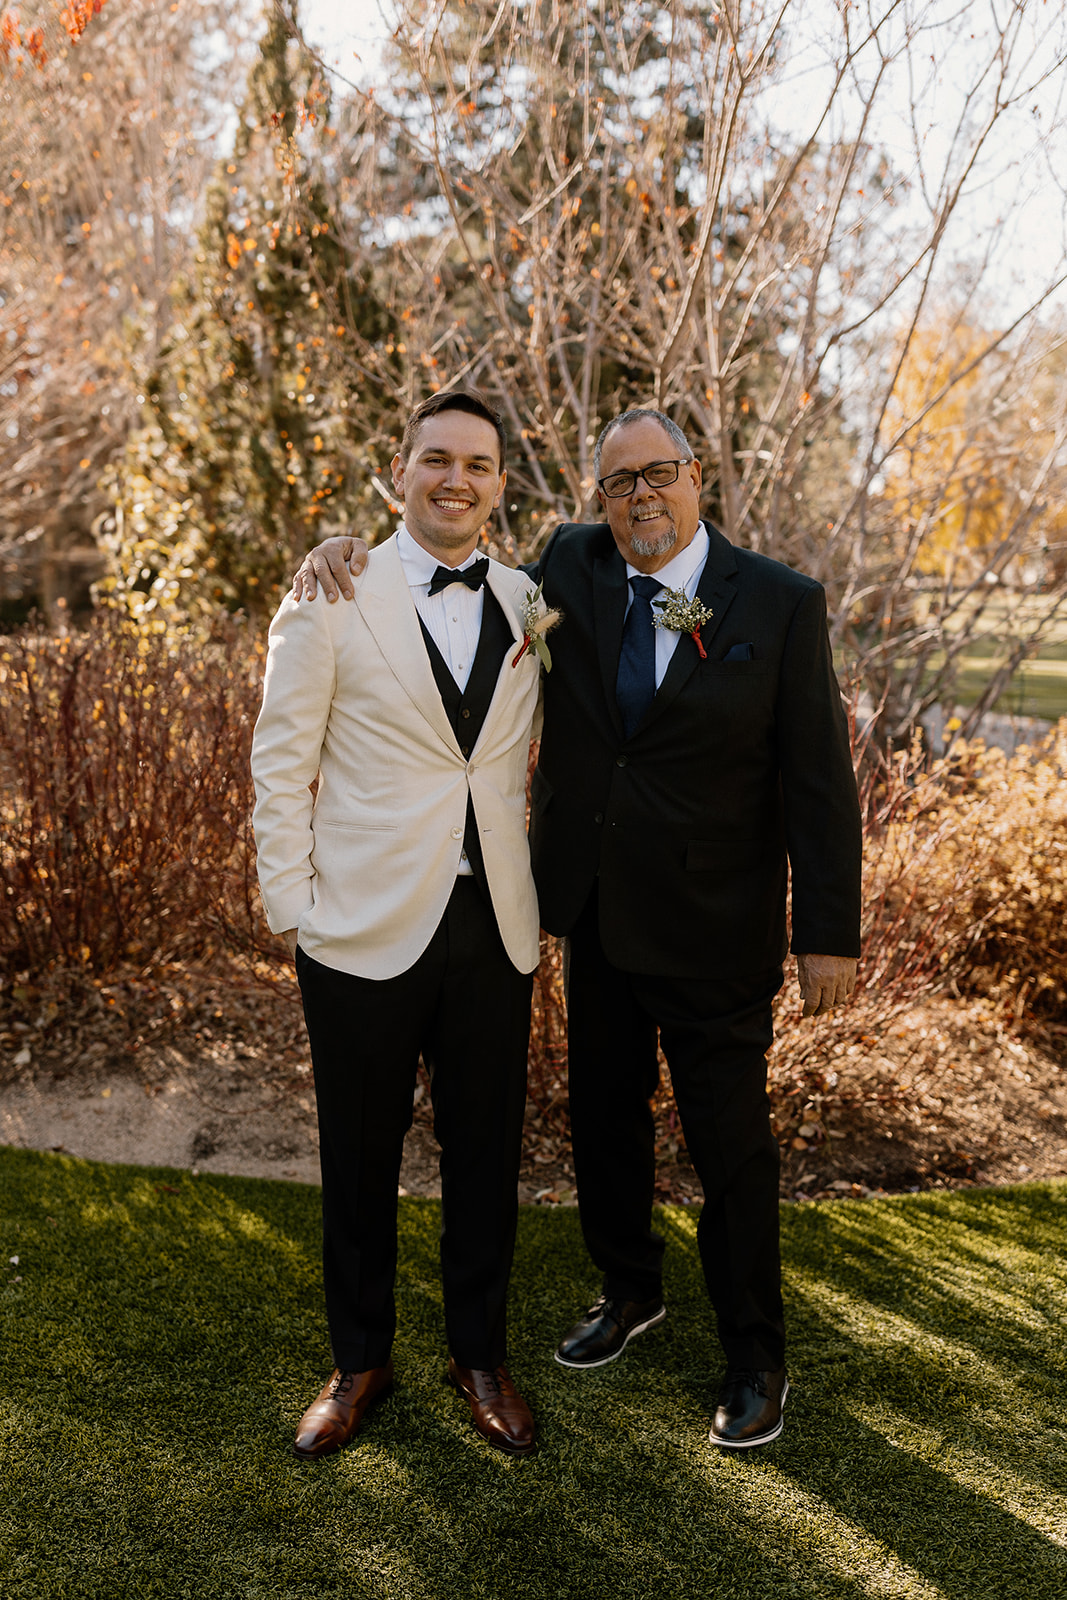 Groom poses with his proud father before his dreamy wedding day